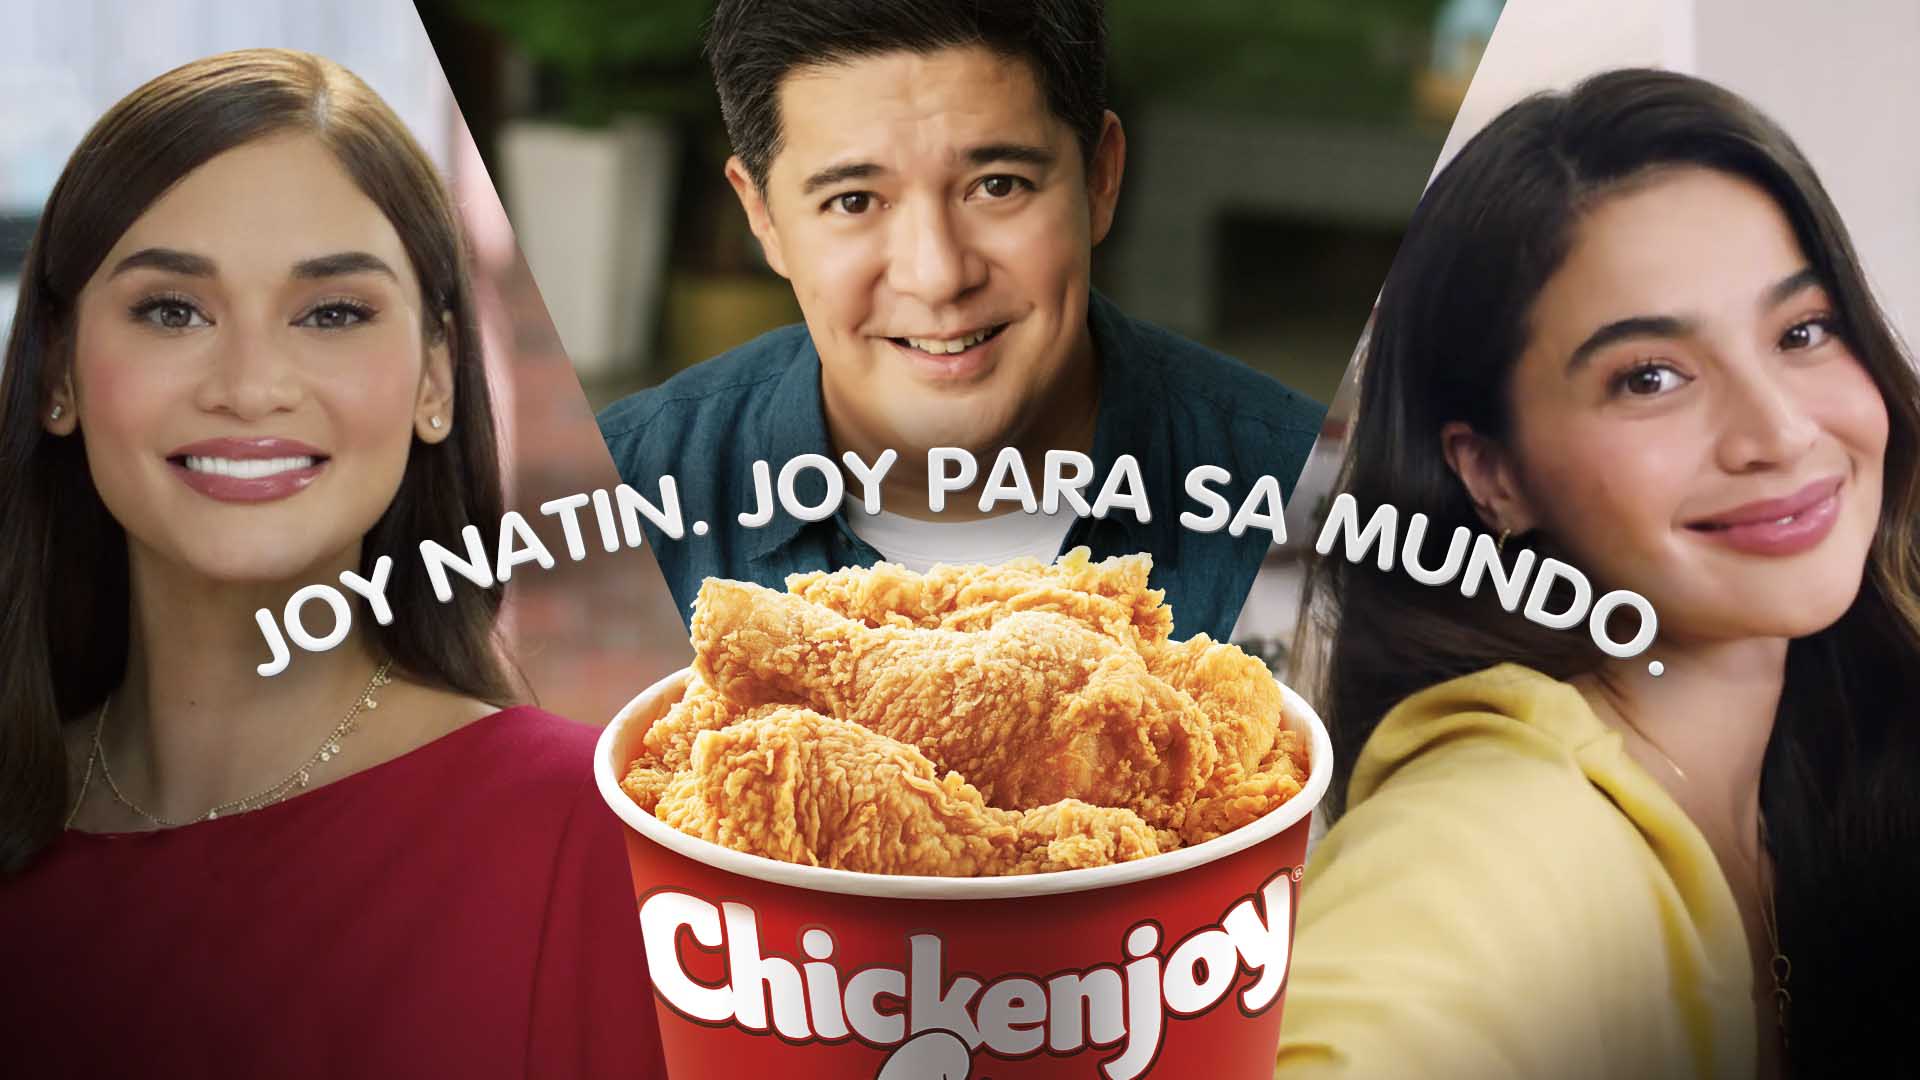 Here’s why Chickenjoy is the Pride and Joy of the Philippines